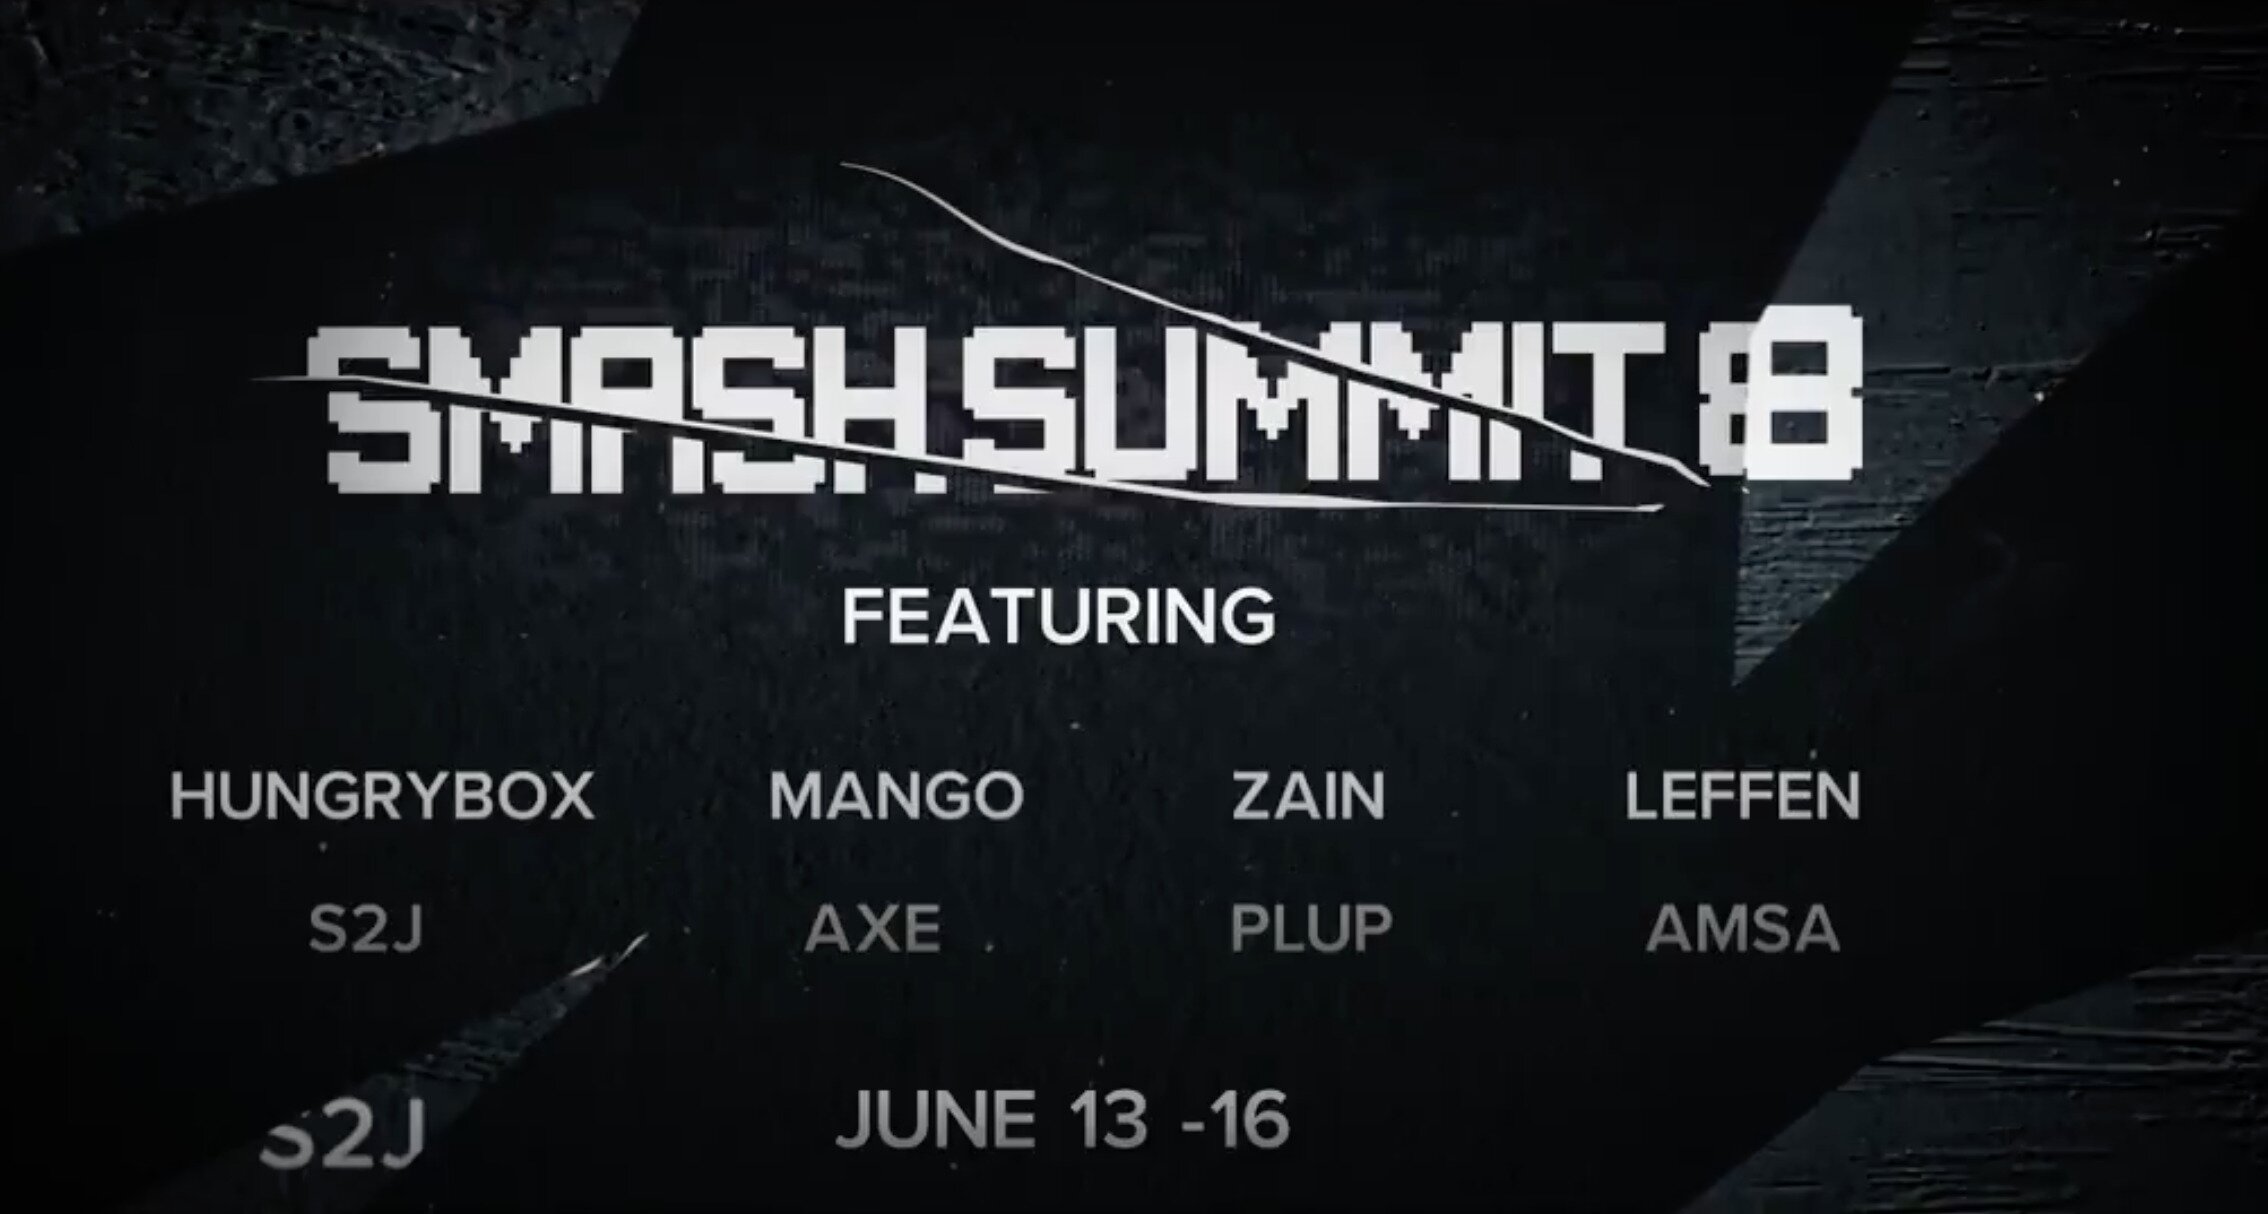 Eight of the most well-respected Melee players in the world have been invited to Smash Summit 8.